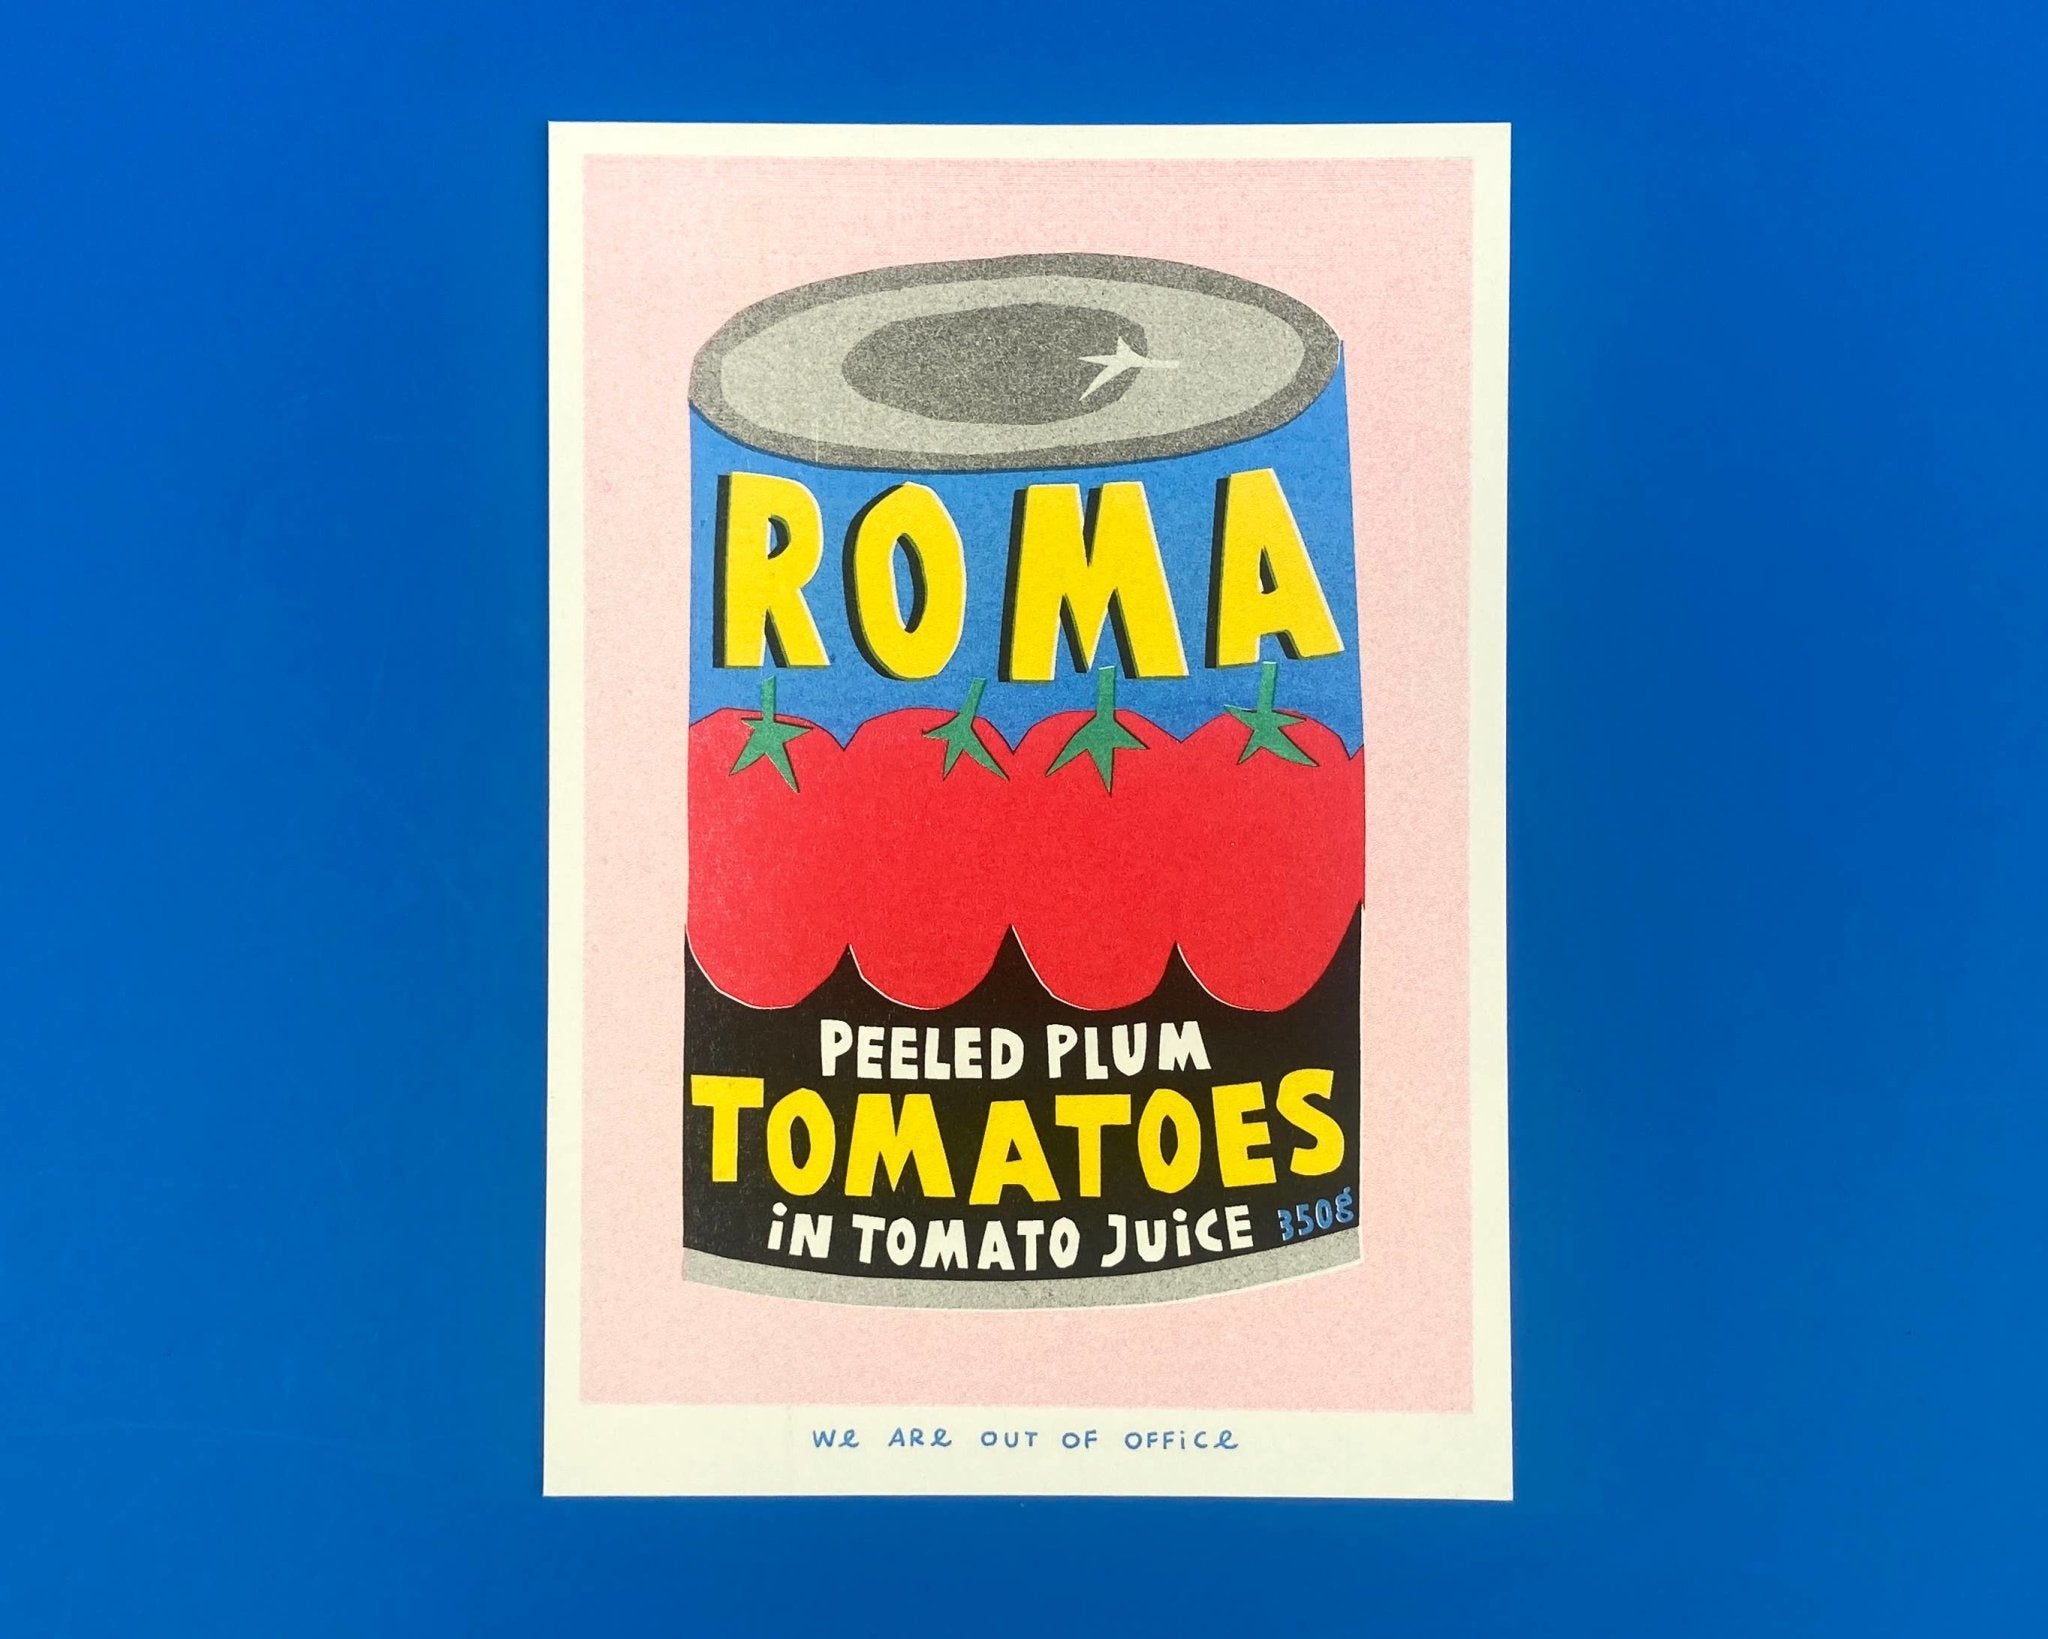 We are out of office - A risograph print of a can of Roma plum Tomatoes - Ensemble Studios